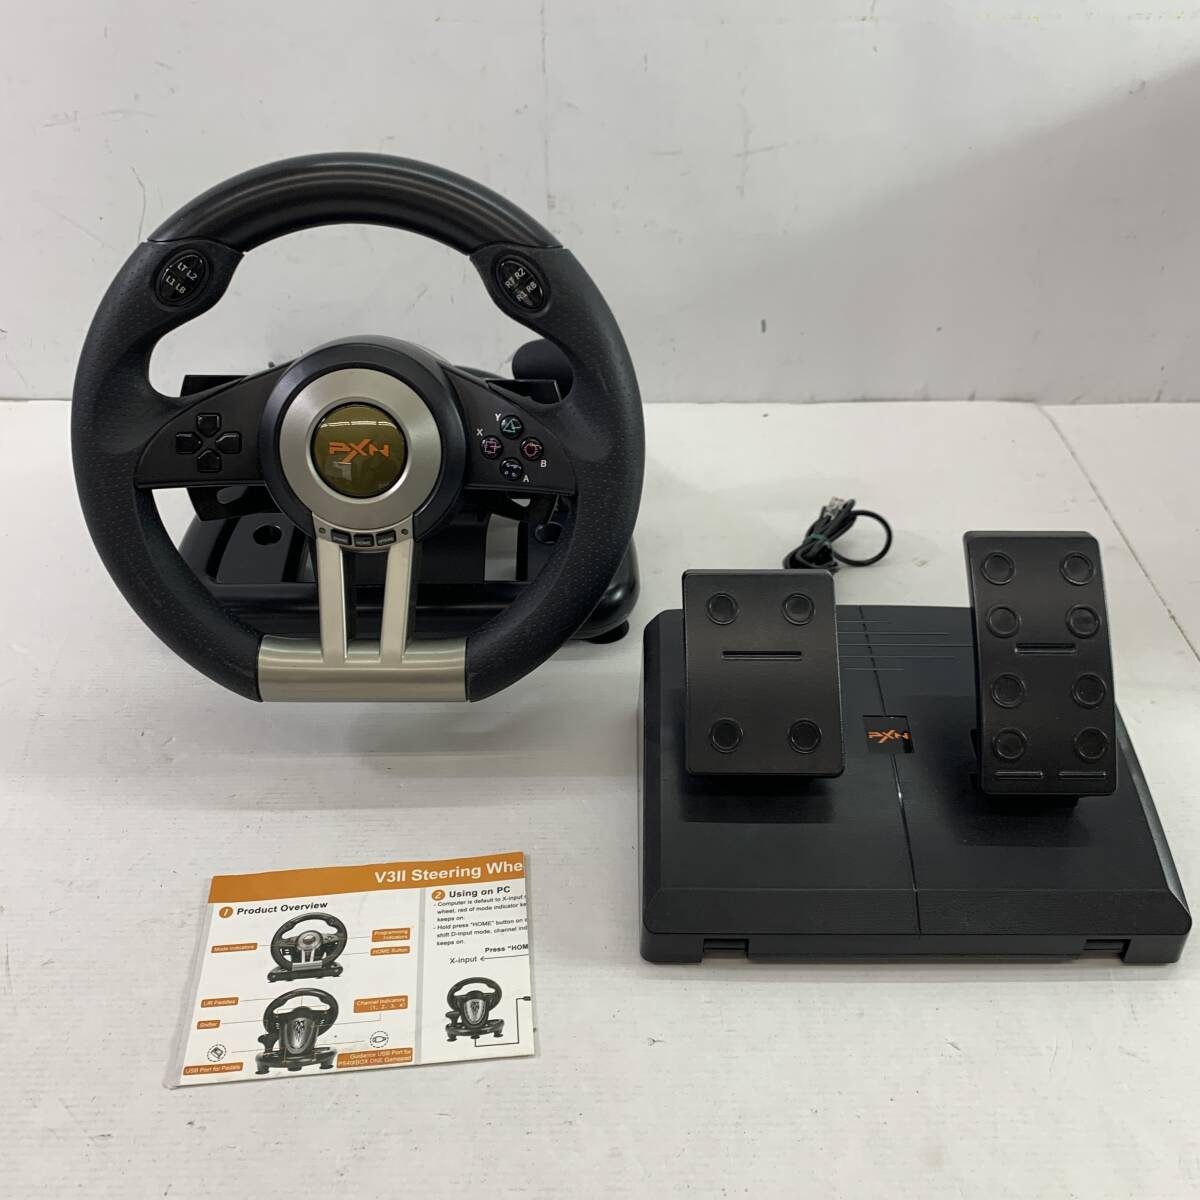 (26269)=[1 jpy ~]PXN steering wheel controller V3Ⅱ racing wheel PXN-V3 Pro [USB/ pedal attached / box less .] secondhand goods 